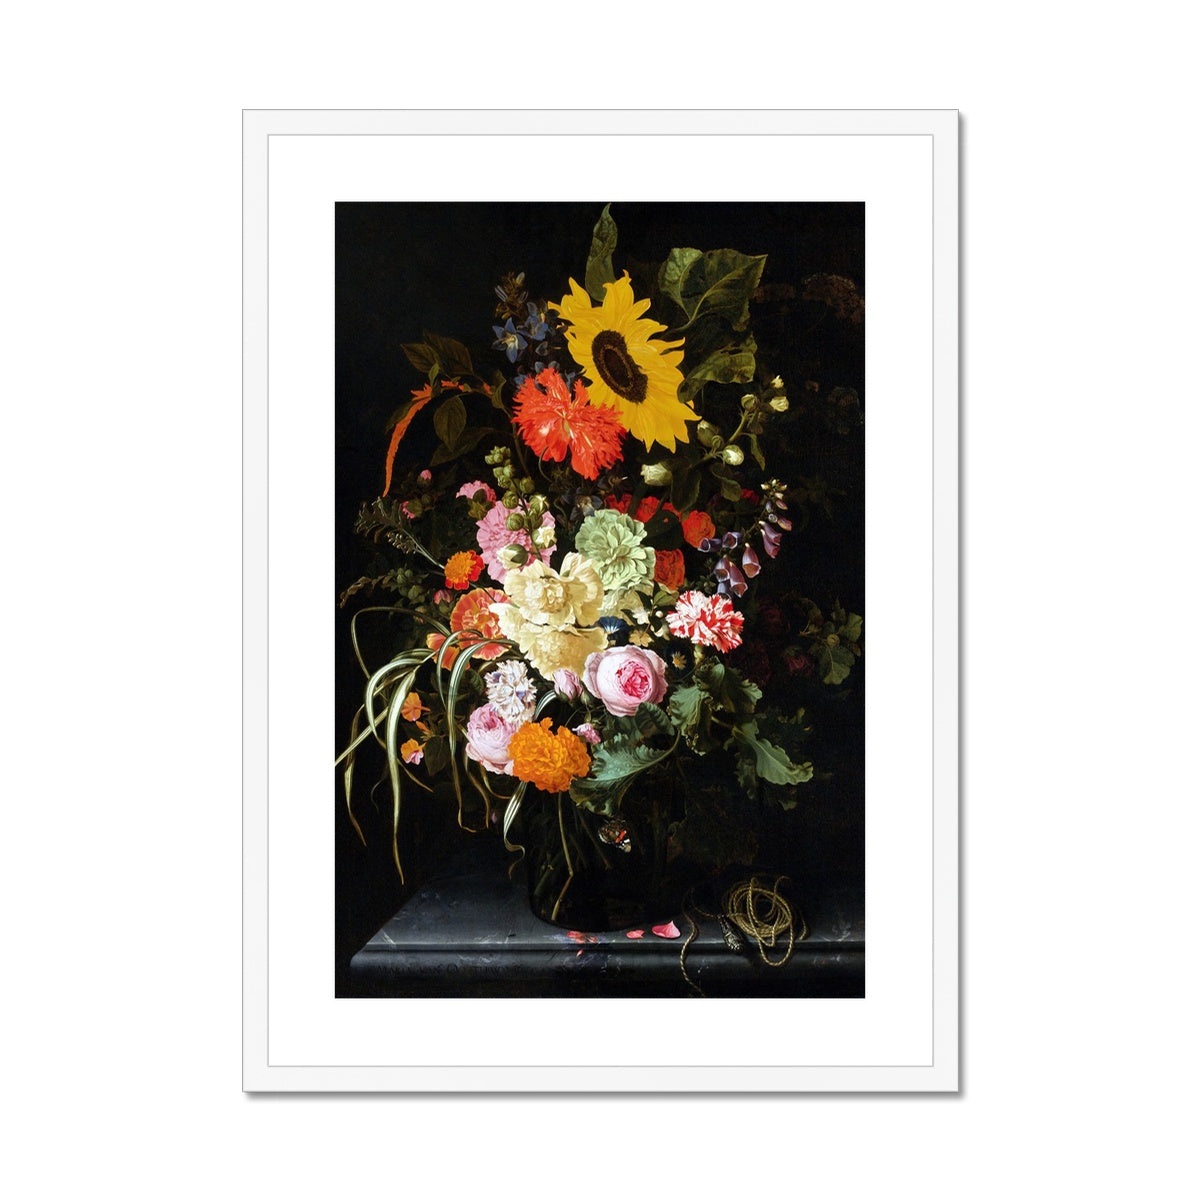 &#39;Roses, Carnation, Marigolds and other Flowers with a Sunflower and Striped Grass&#39;. Still Life by Maria van Oosterwijck. Framed Open Edition Fine Art Print. Historic Art